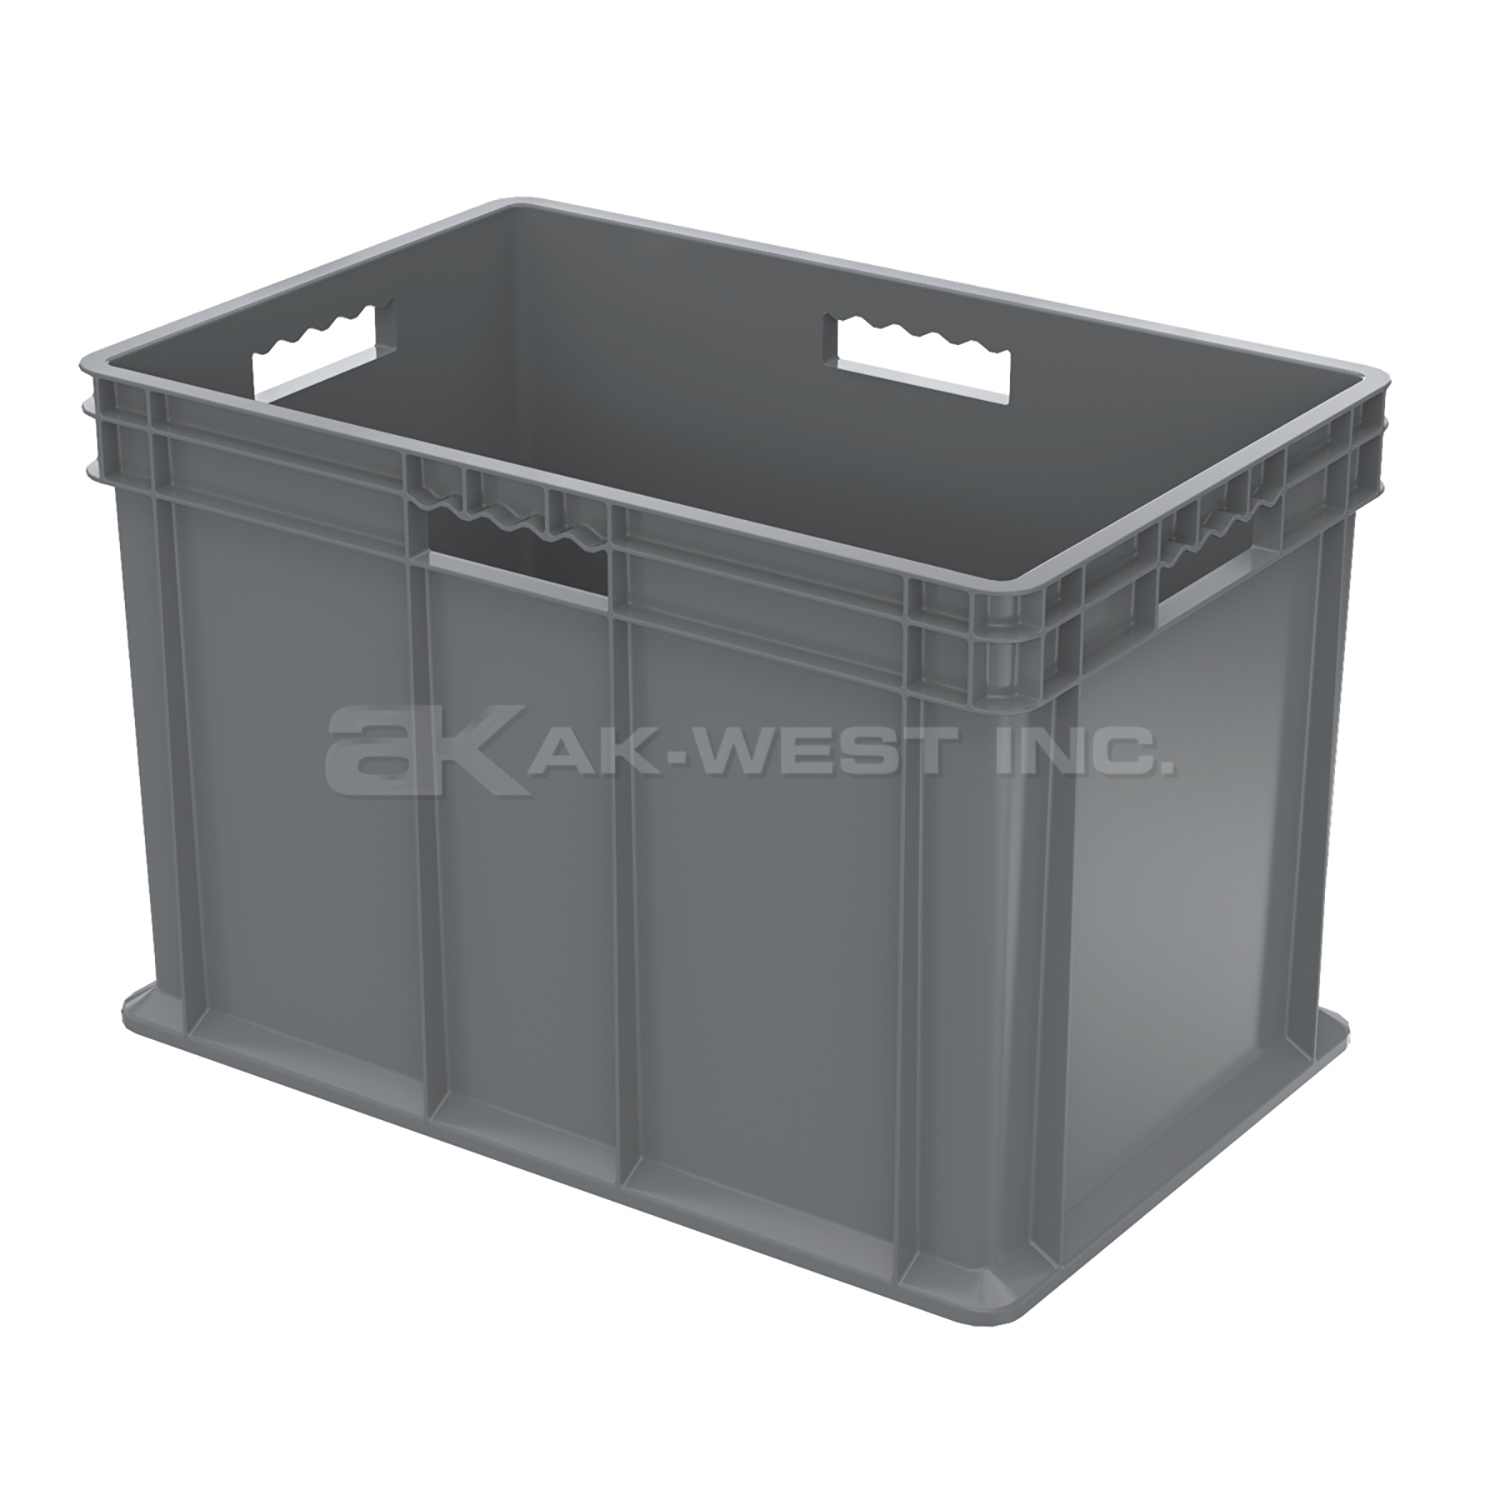 Grey, 23-3/4" x 15-3/4" x 16-1/8", Solid Side and Base, Straight Wall Container (2 Per Carton)